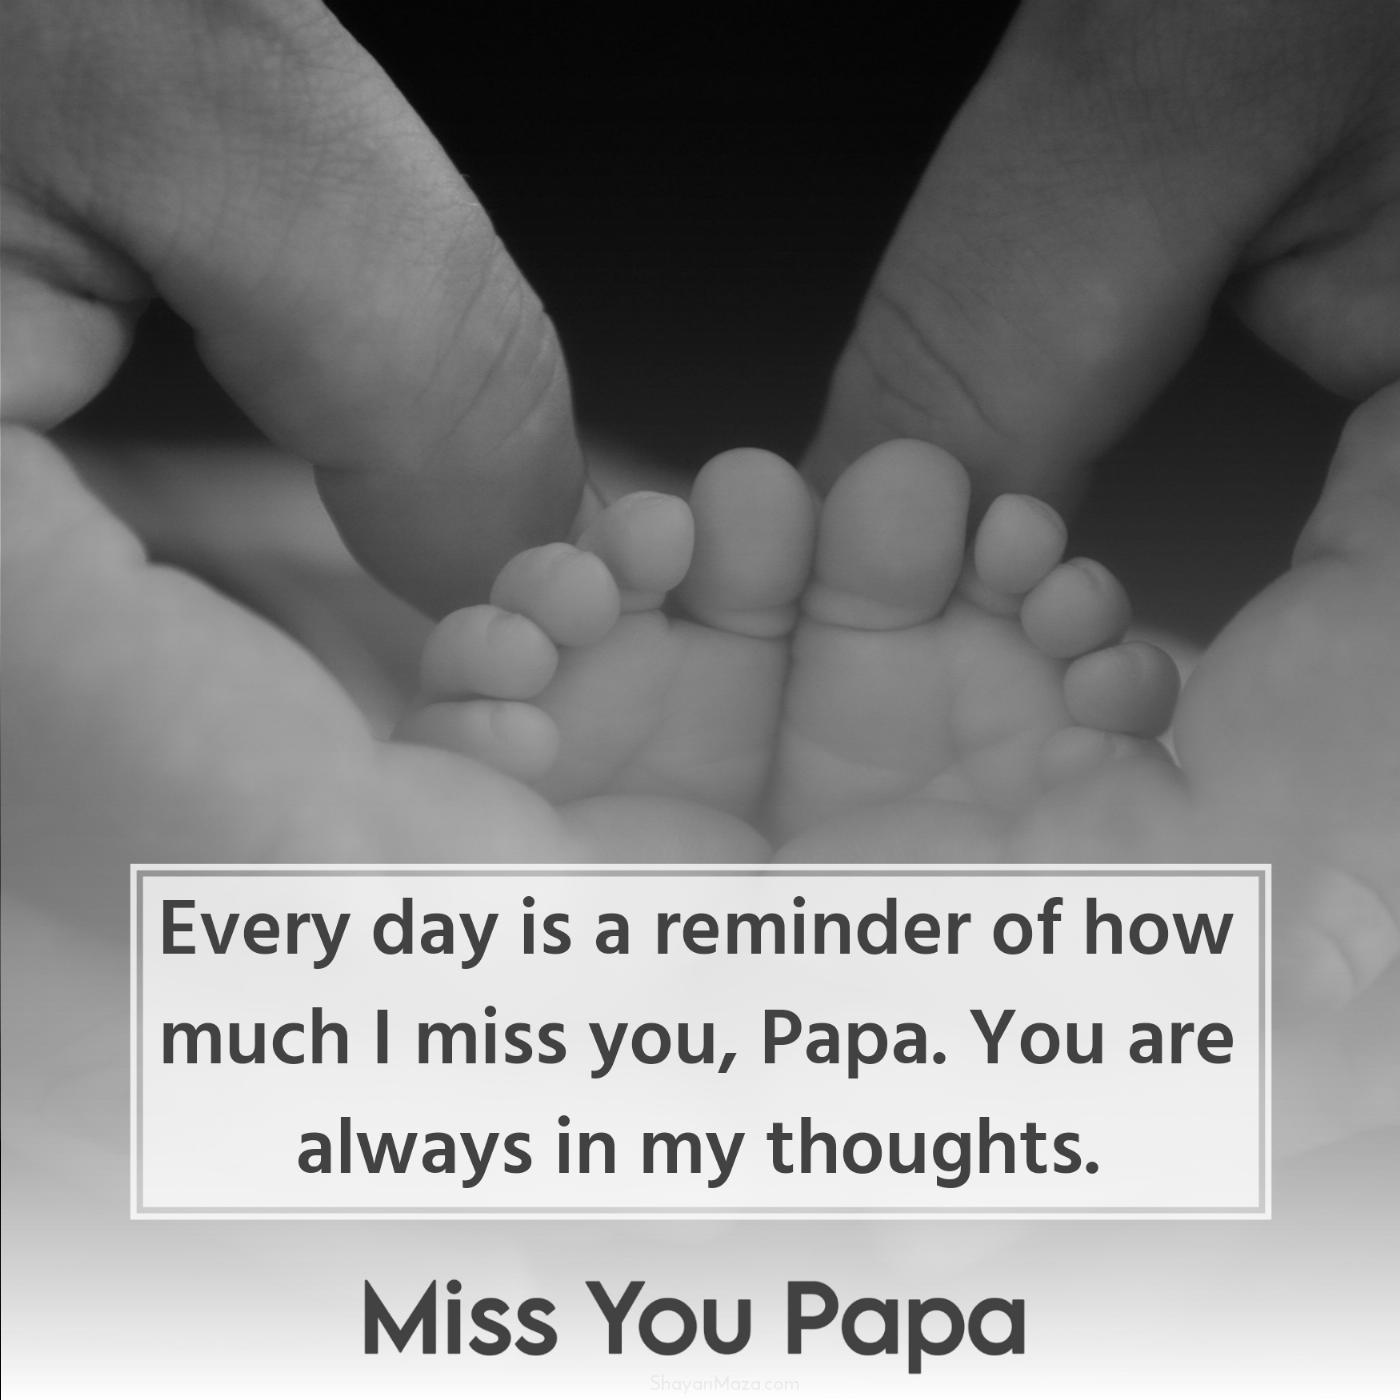 Every day is a reminder of how much I miss you Papa